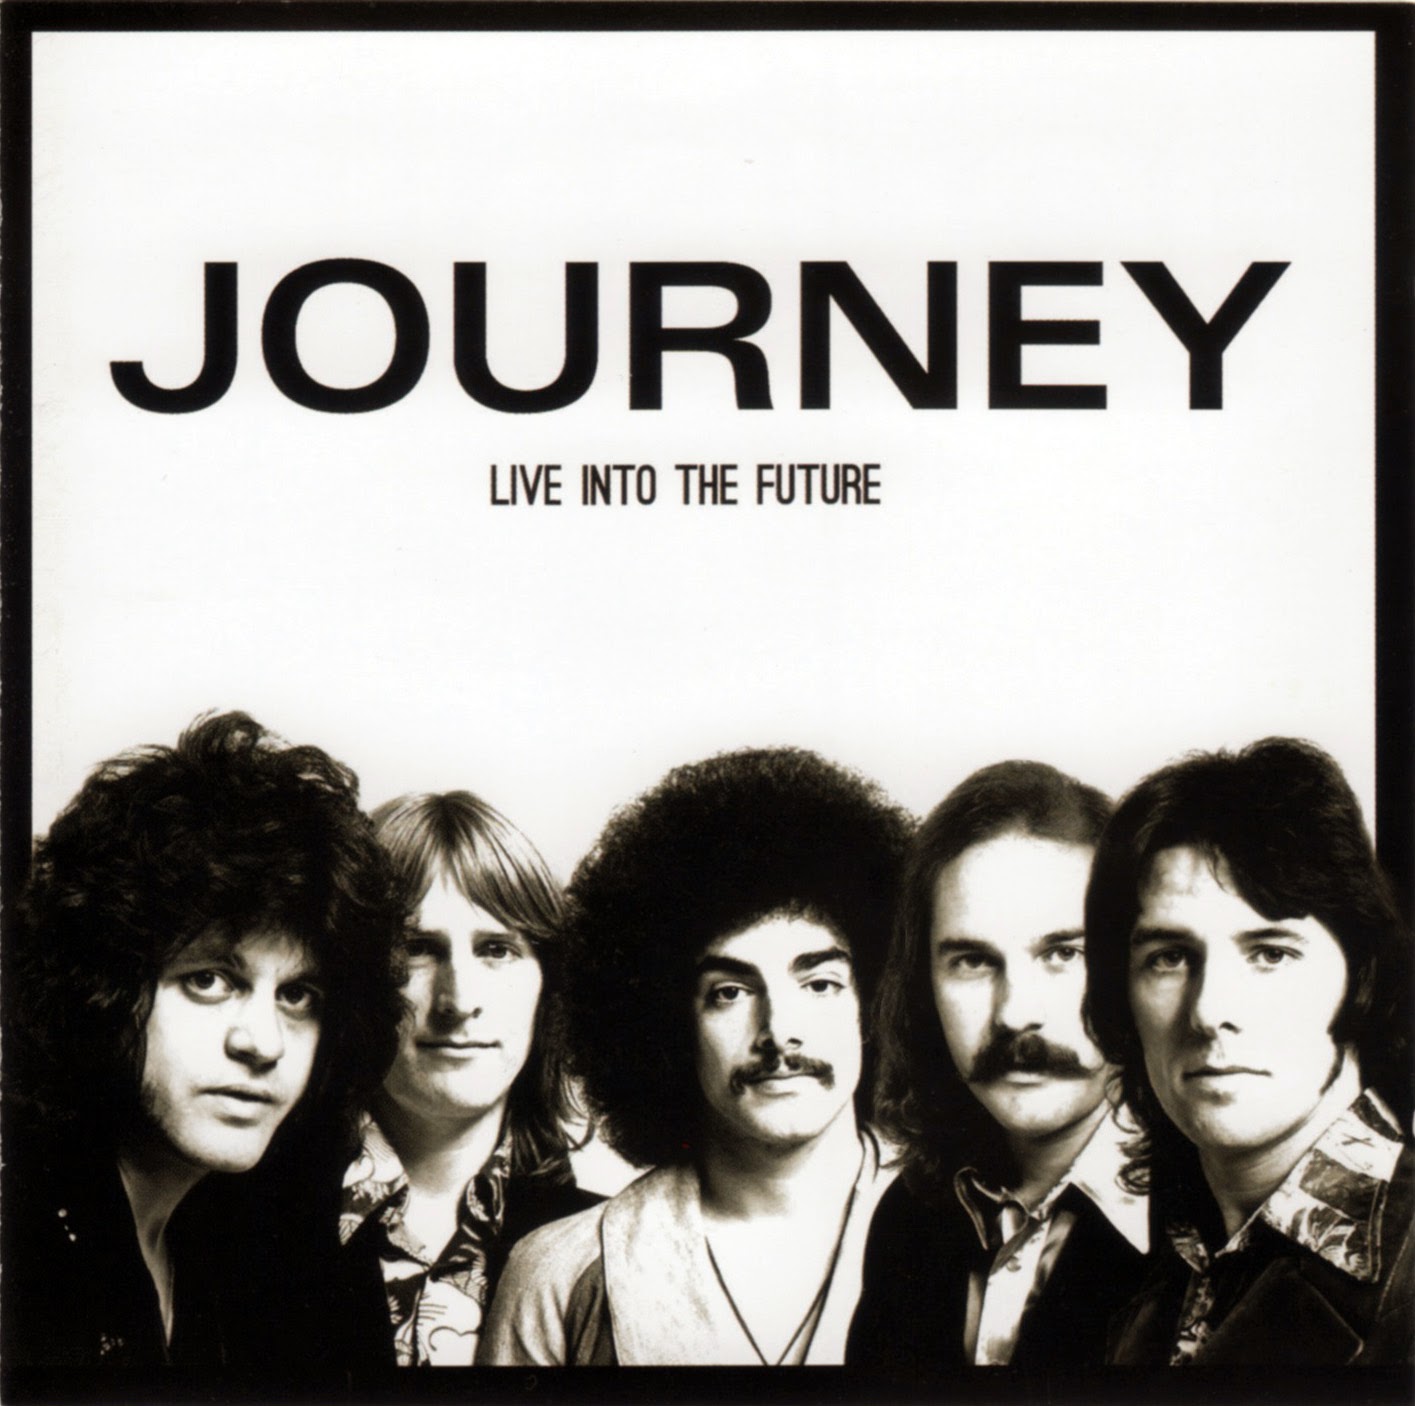 Live Into The Future | Journey Band Wiki | FANDOM powered by Wikia